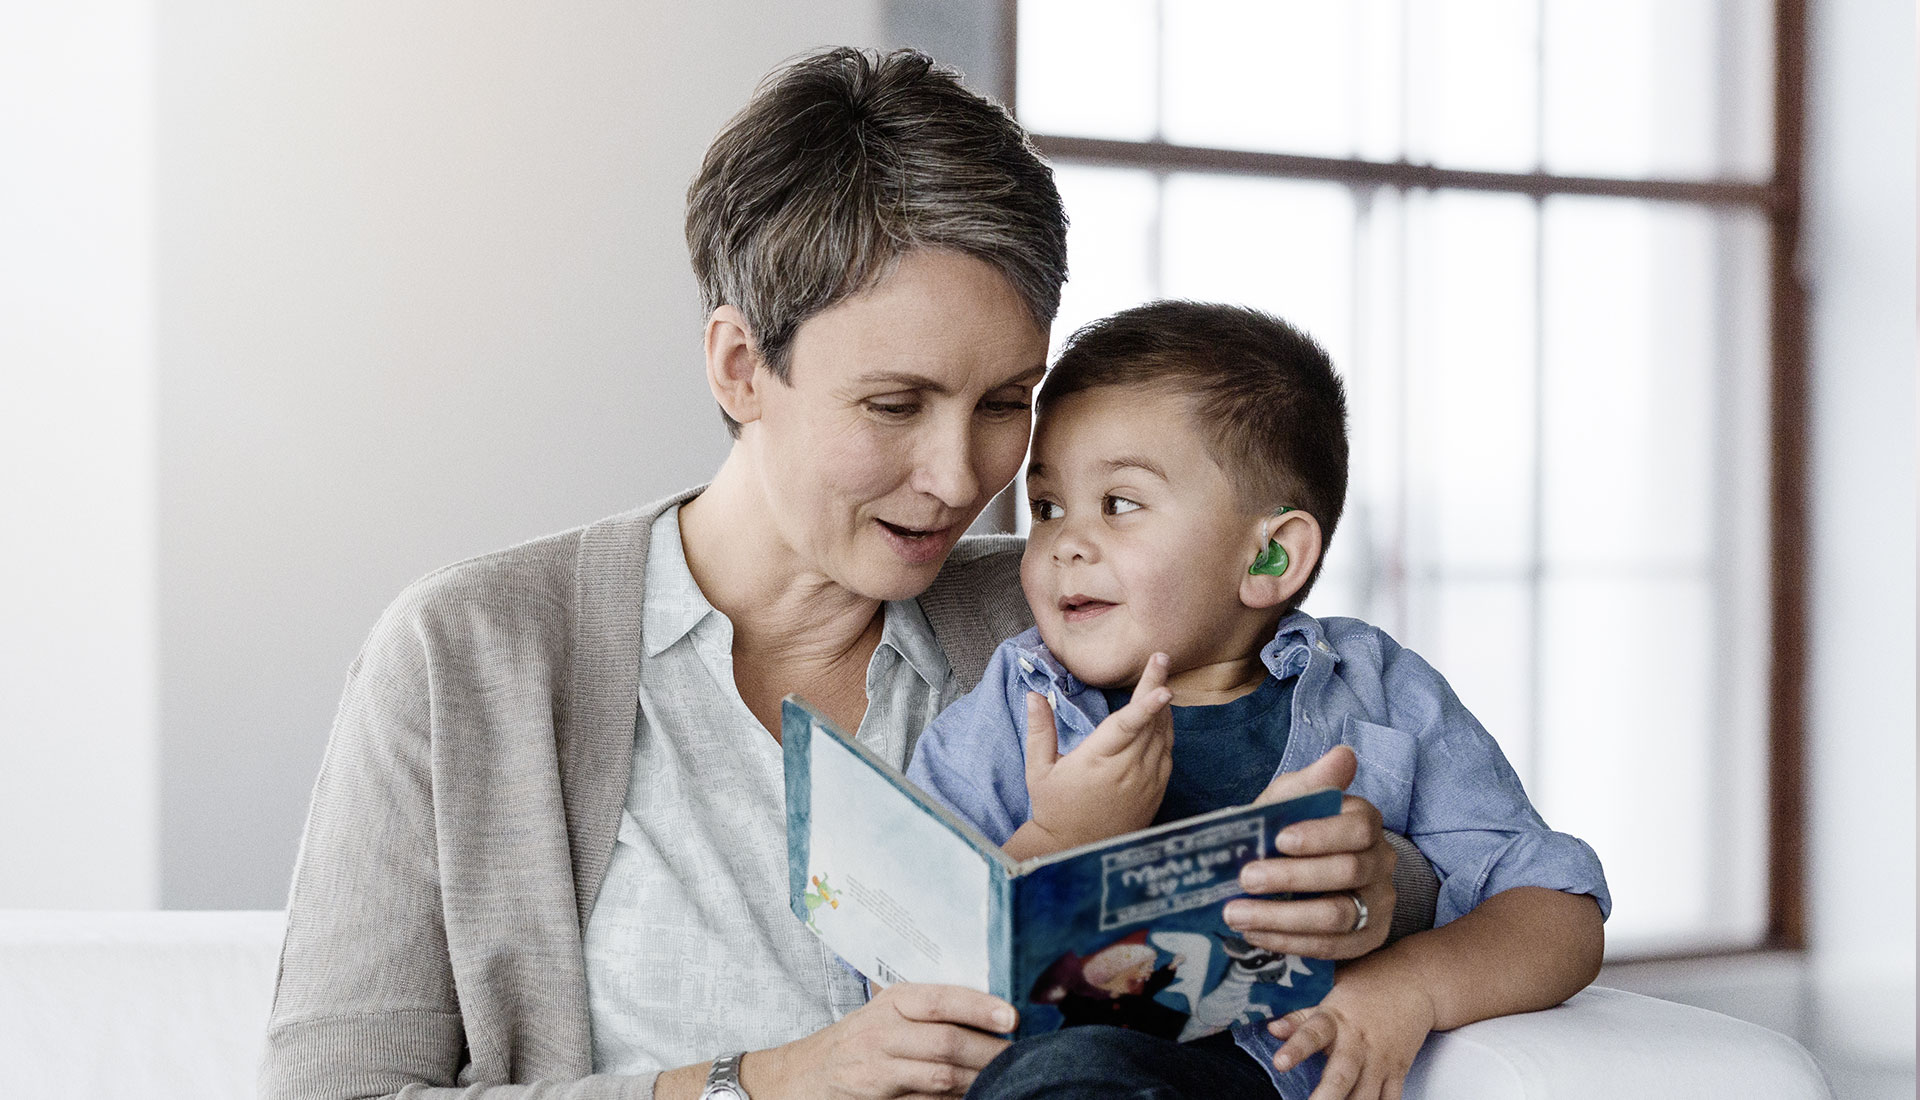 woman reading a book to a young boy